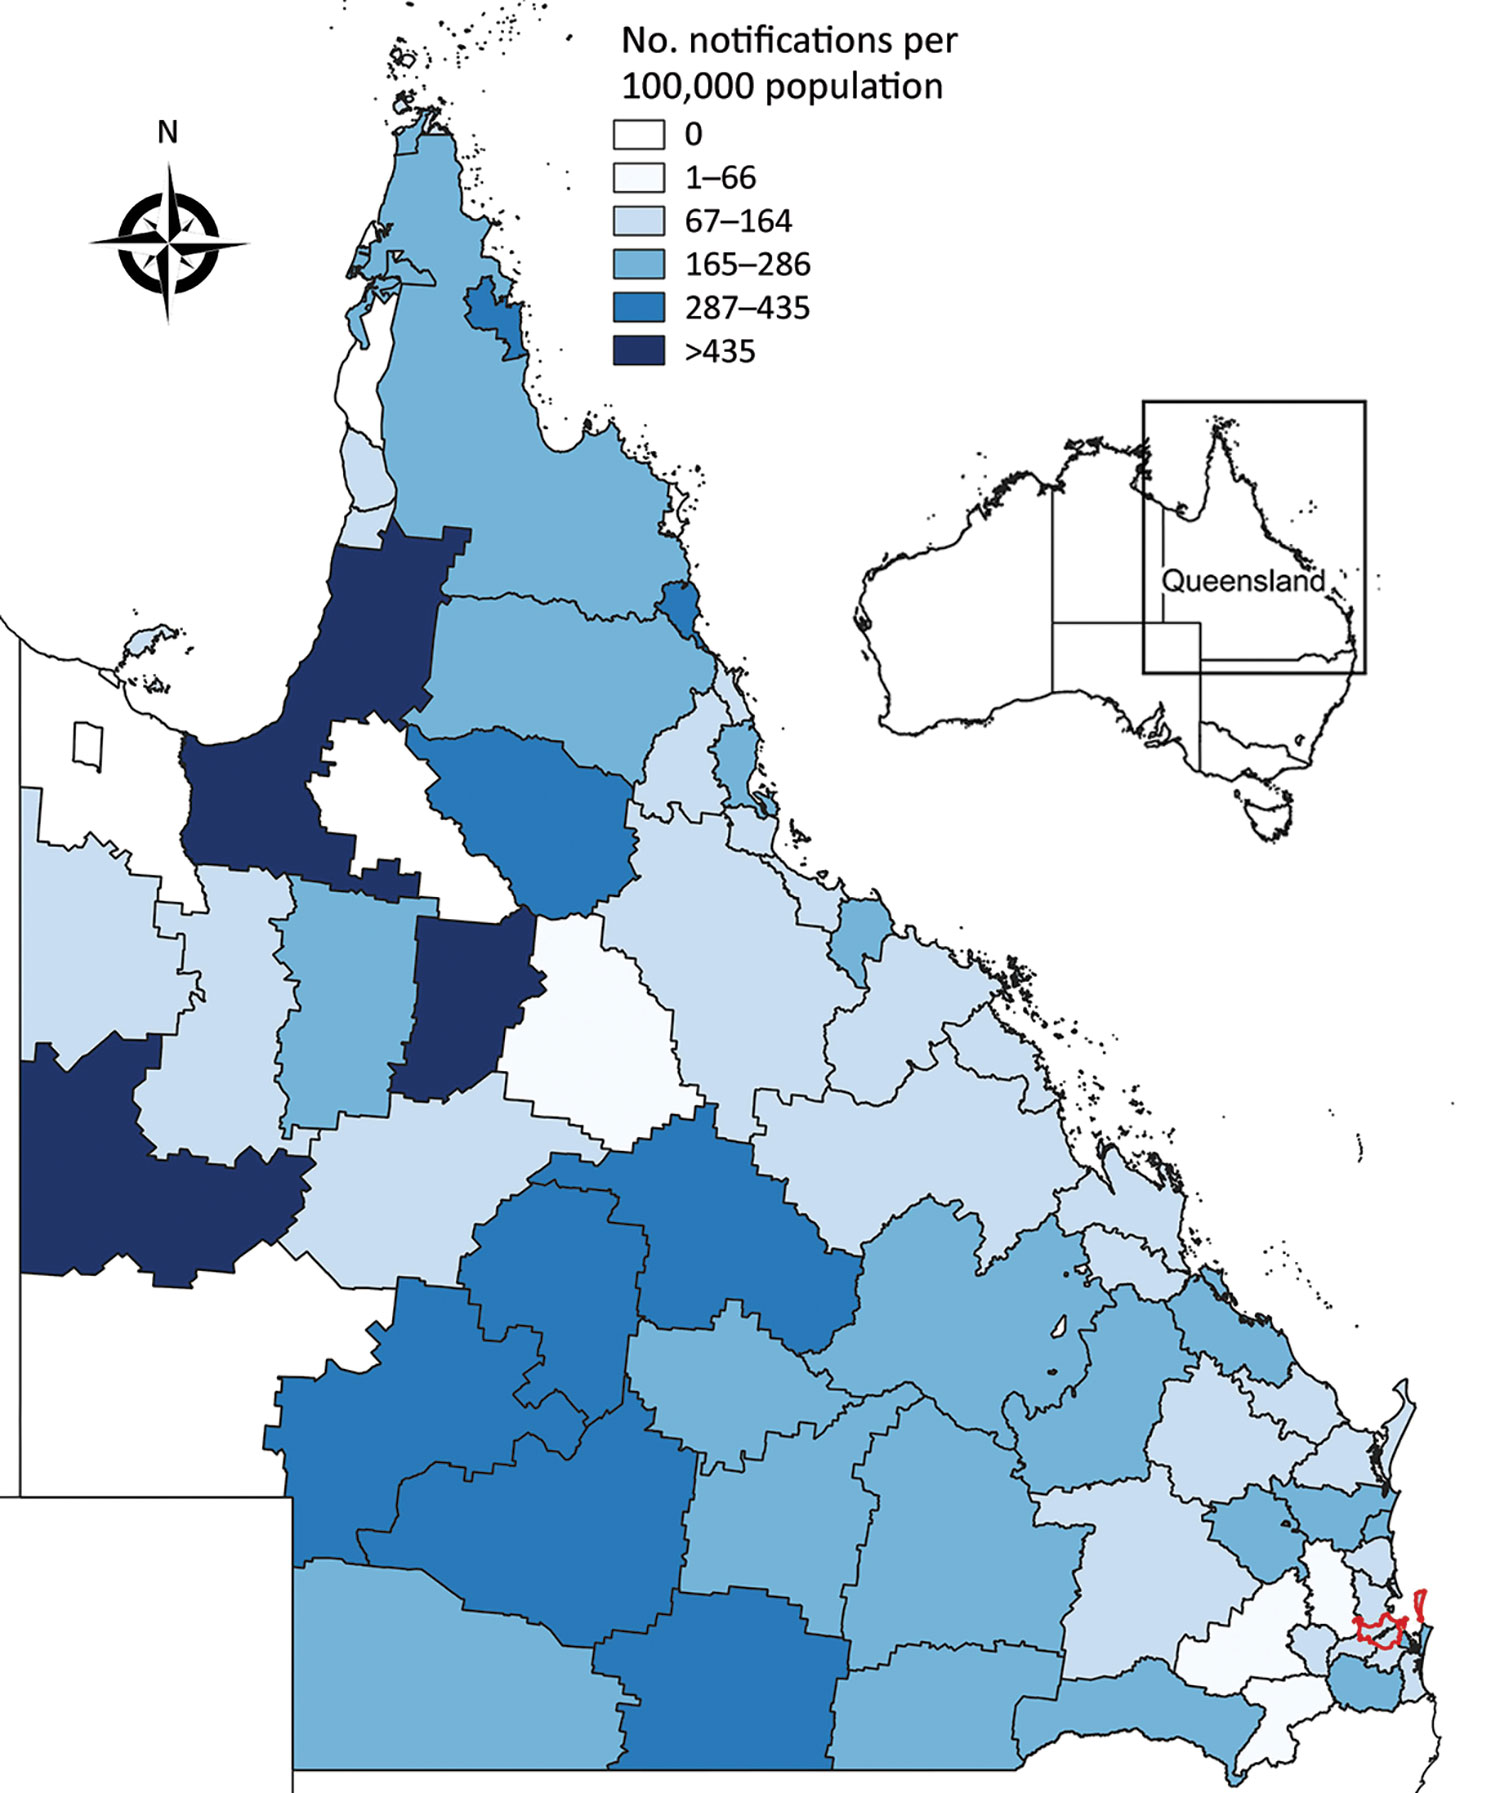 Ross River virus notification rate by local government area, Queensland, Australia, July 1, 2014–June 30, 2015. Brisbane local government area (red outline) is indicated. Inset map shows the location of Queensland in Australia.